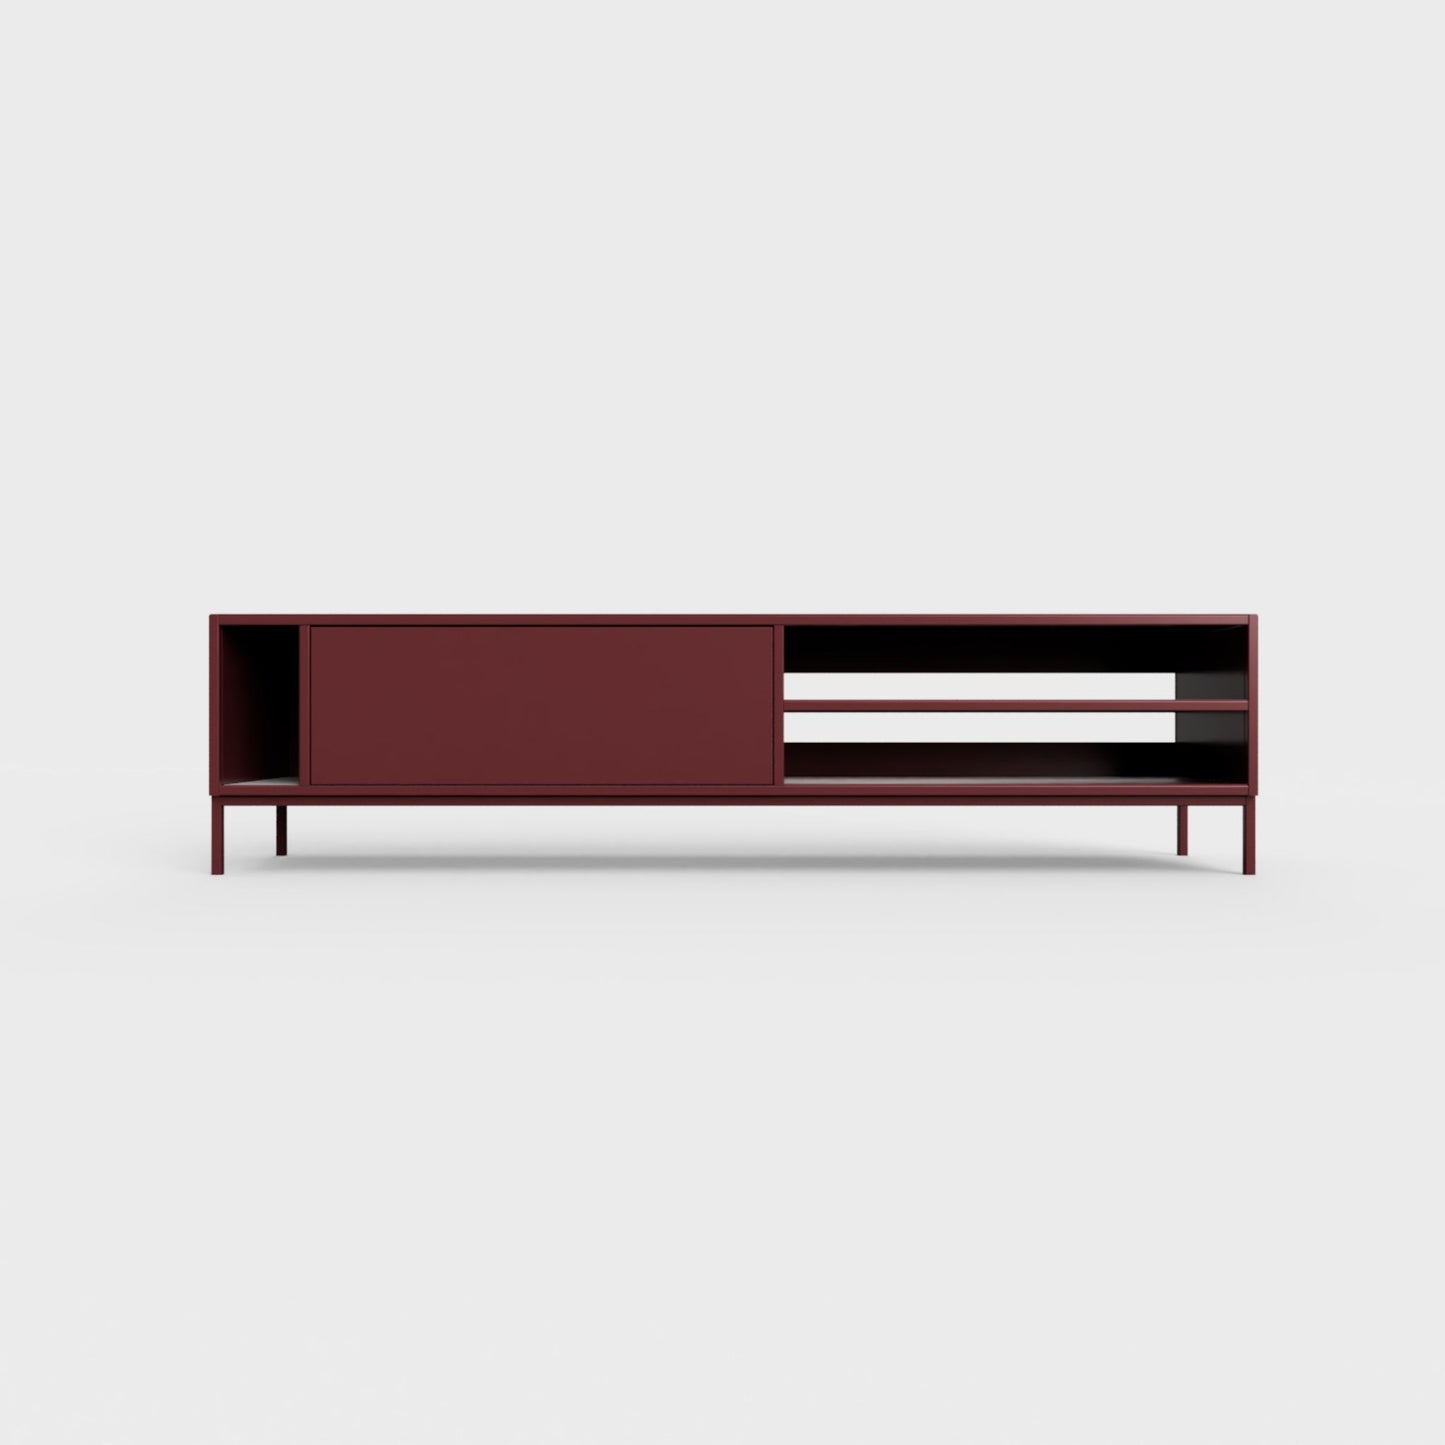 Prunus 03 Lowboard in burgundy red color, powder-coated steel, elegant and modern piece of furniture for your living room